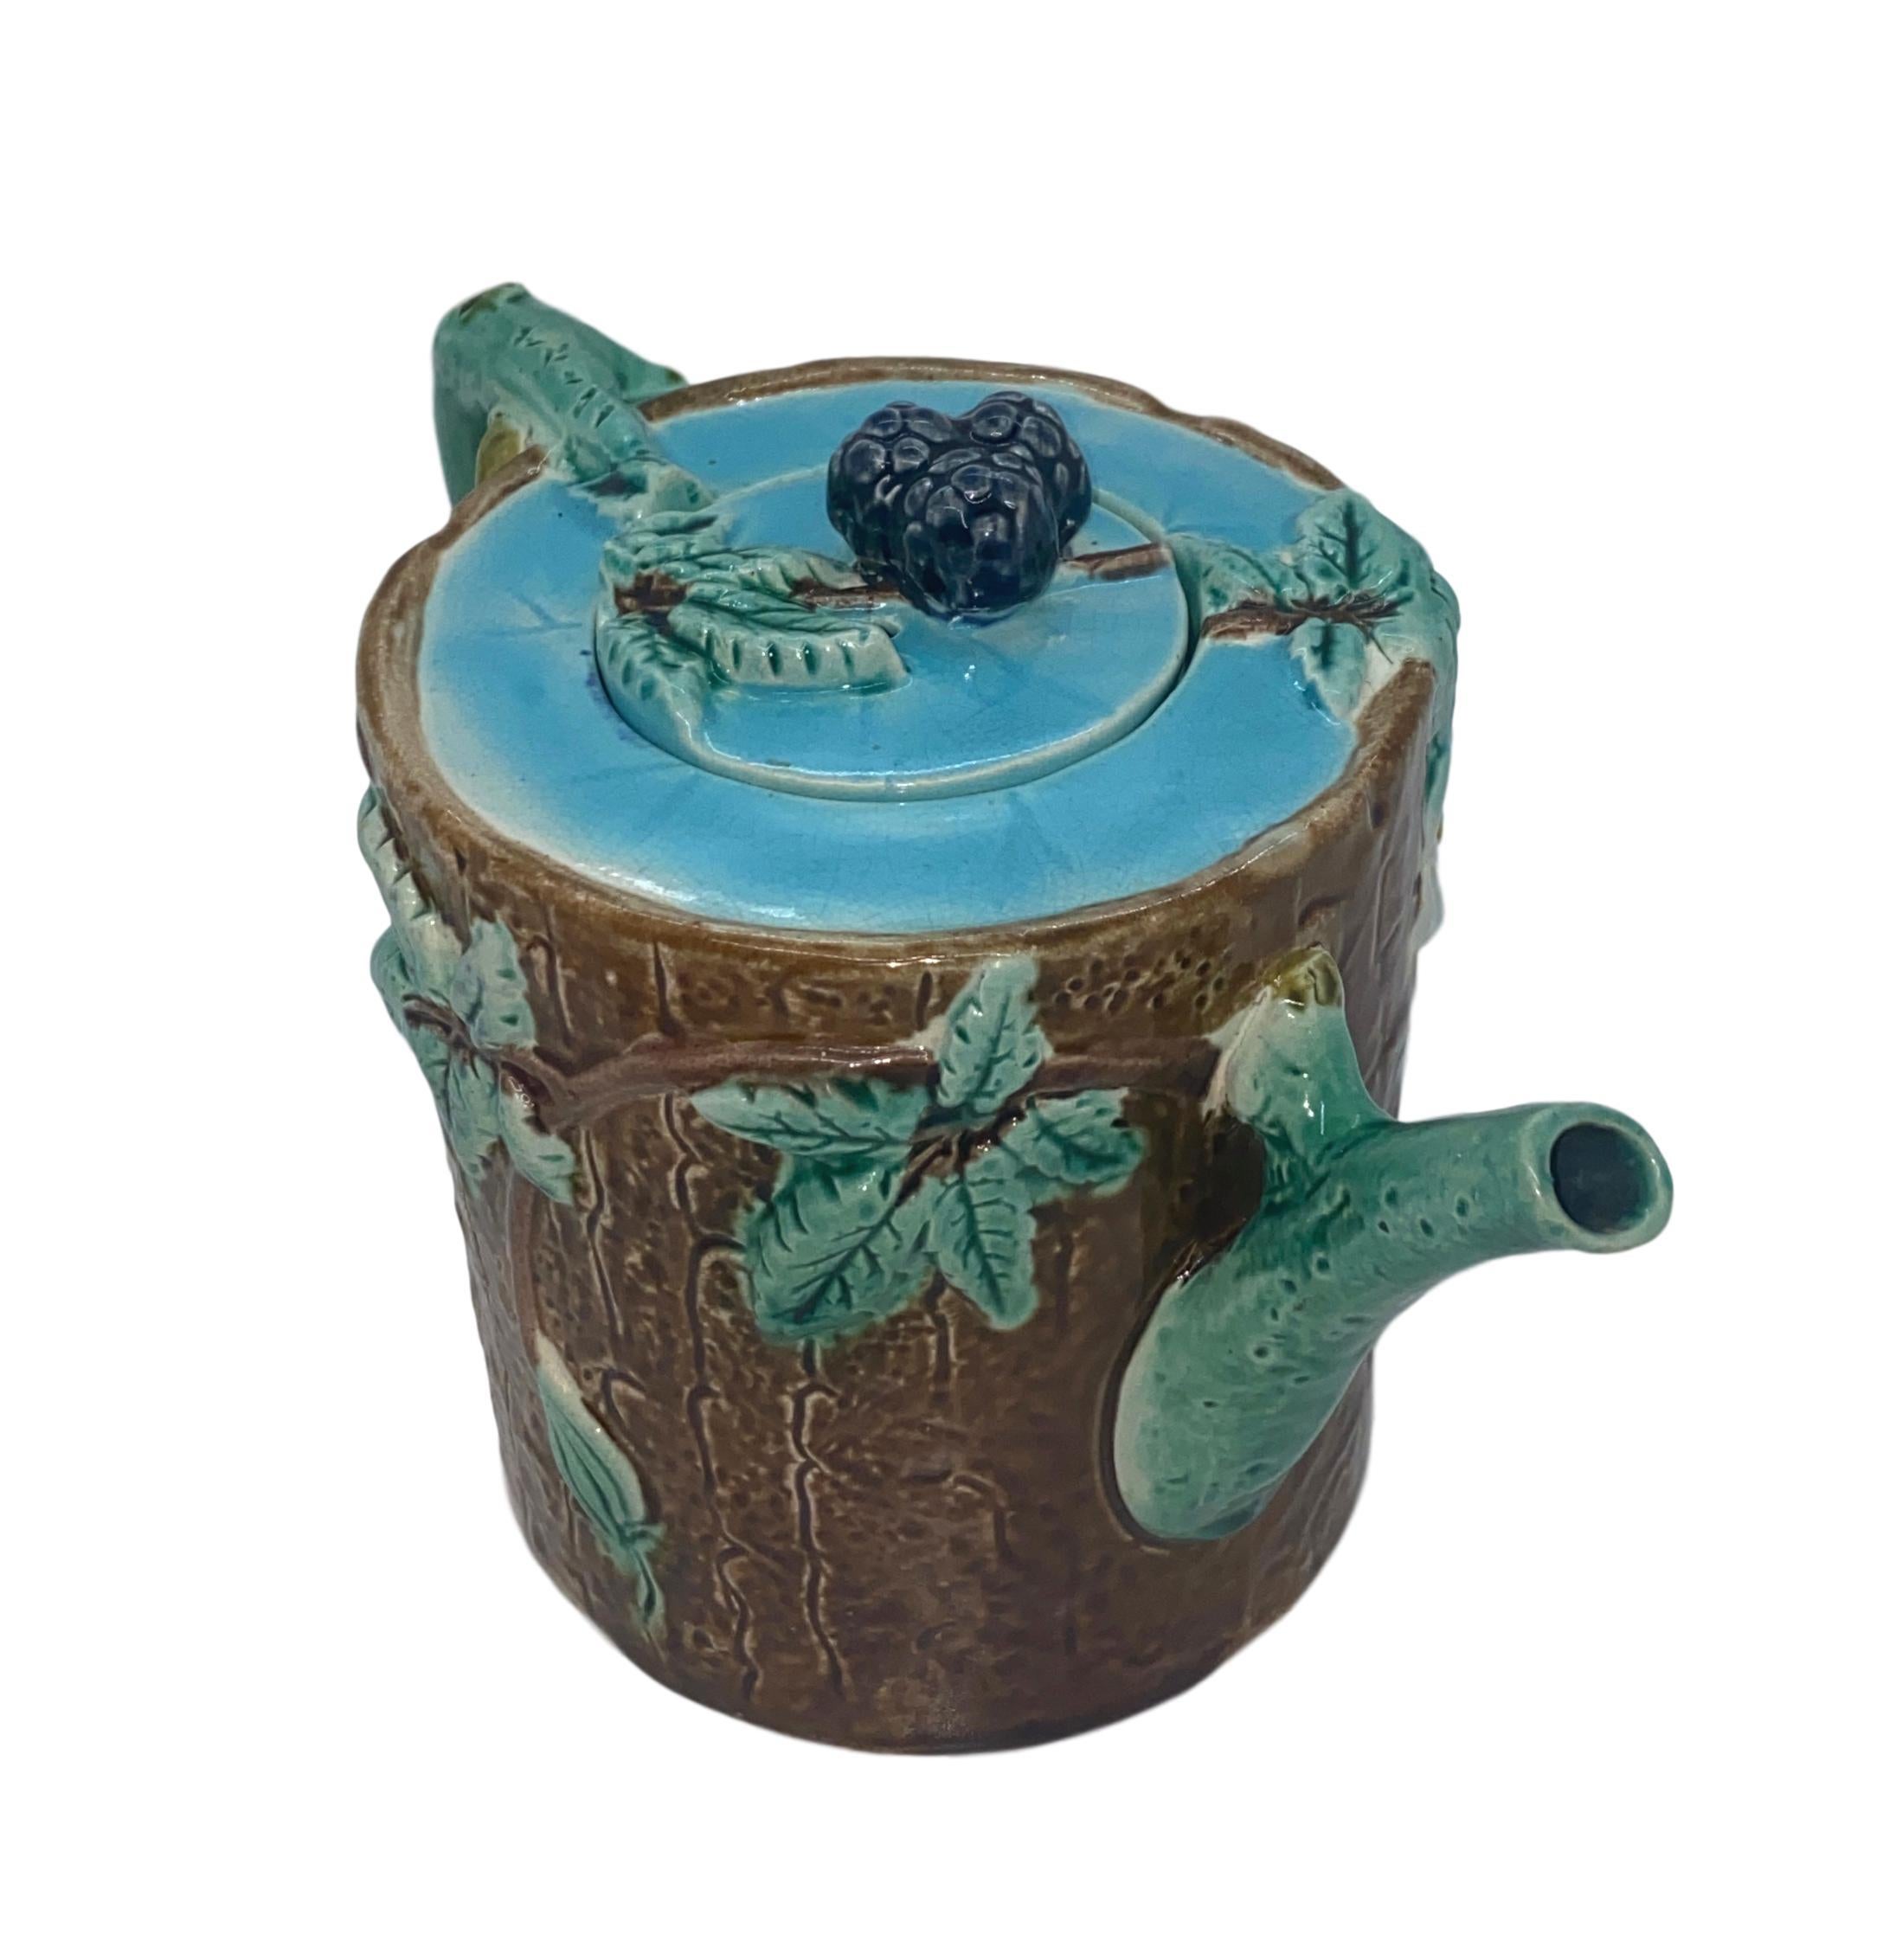 Molded Holdcroft Majolica Blackberry on Tree Trunk Teapot, Turquoise Blue Cover c. 1877 For Sale